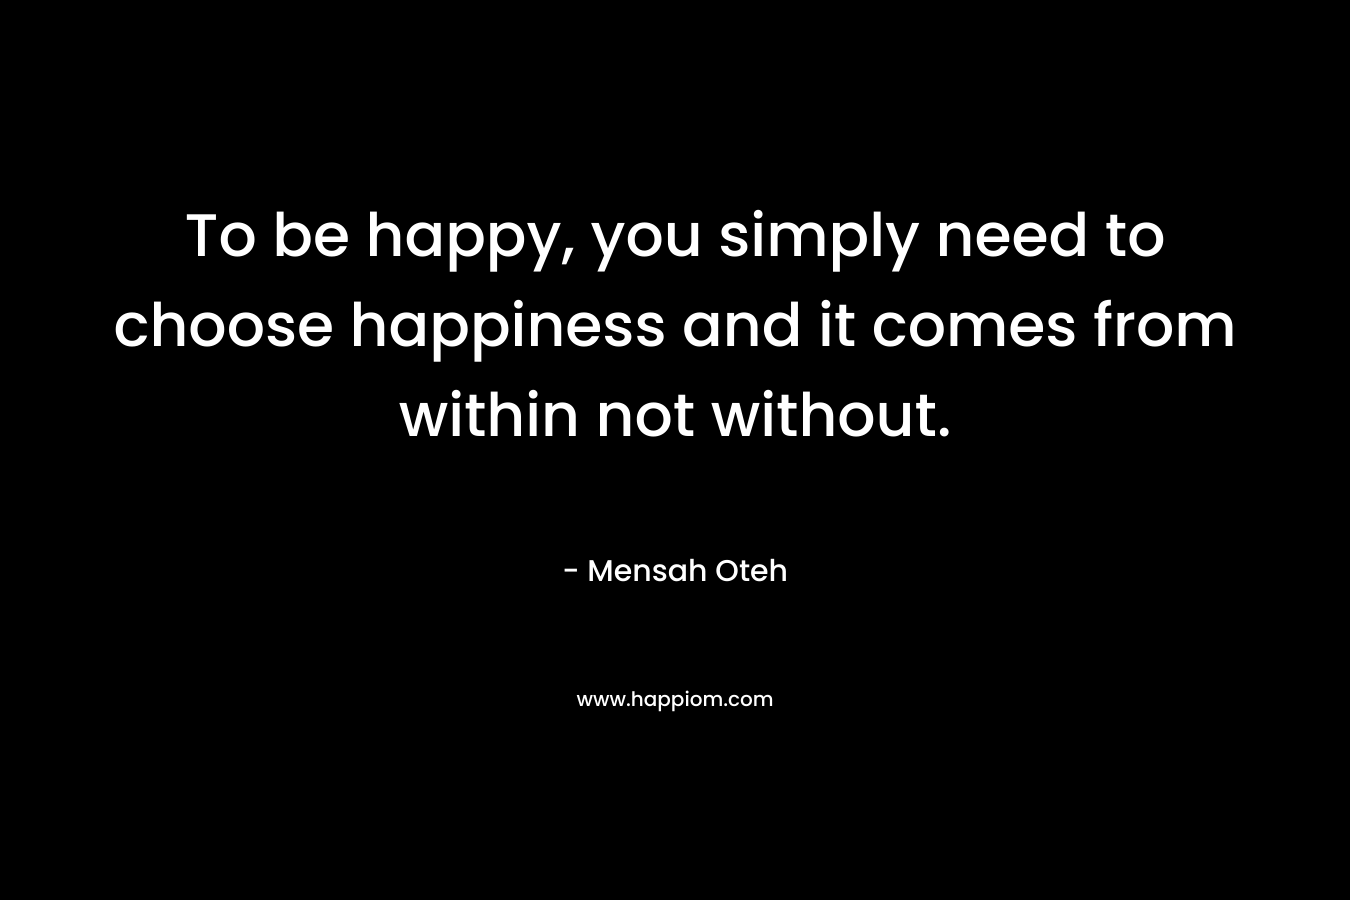 To be happy, you simply need to choose happiness and it comes from within not without.